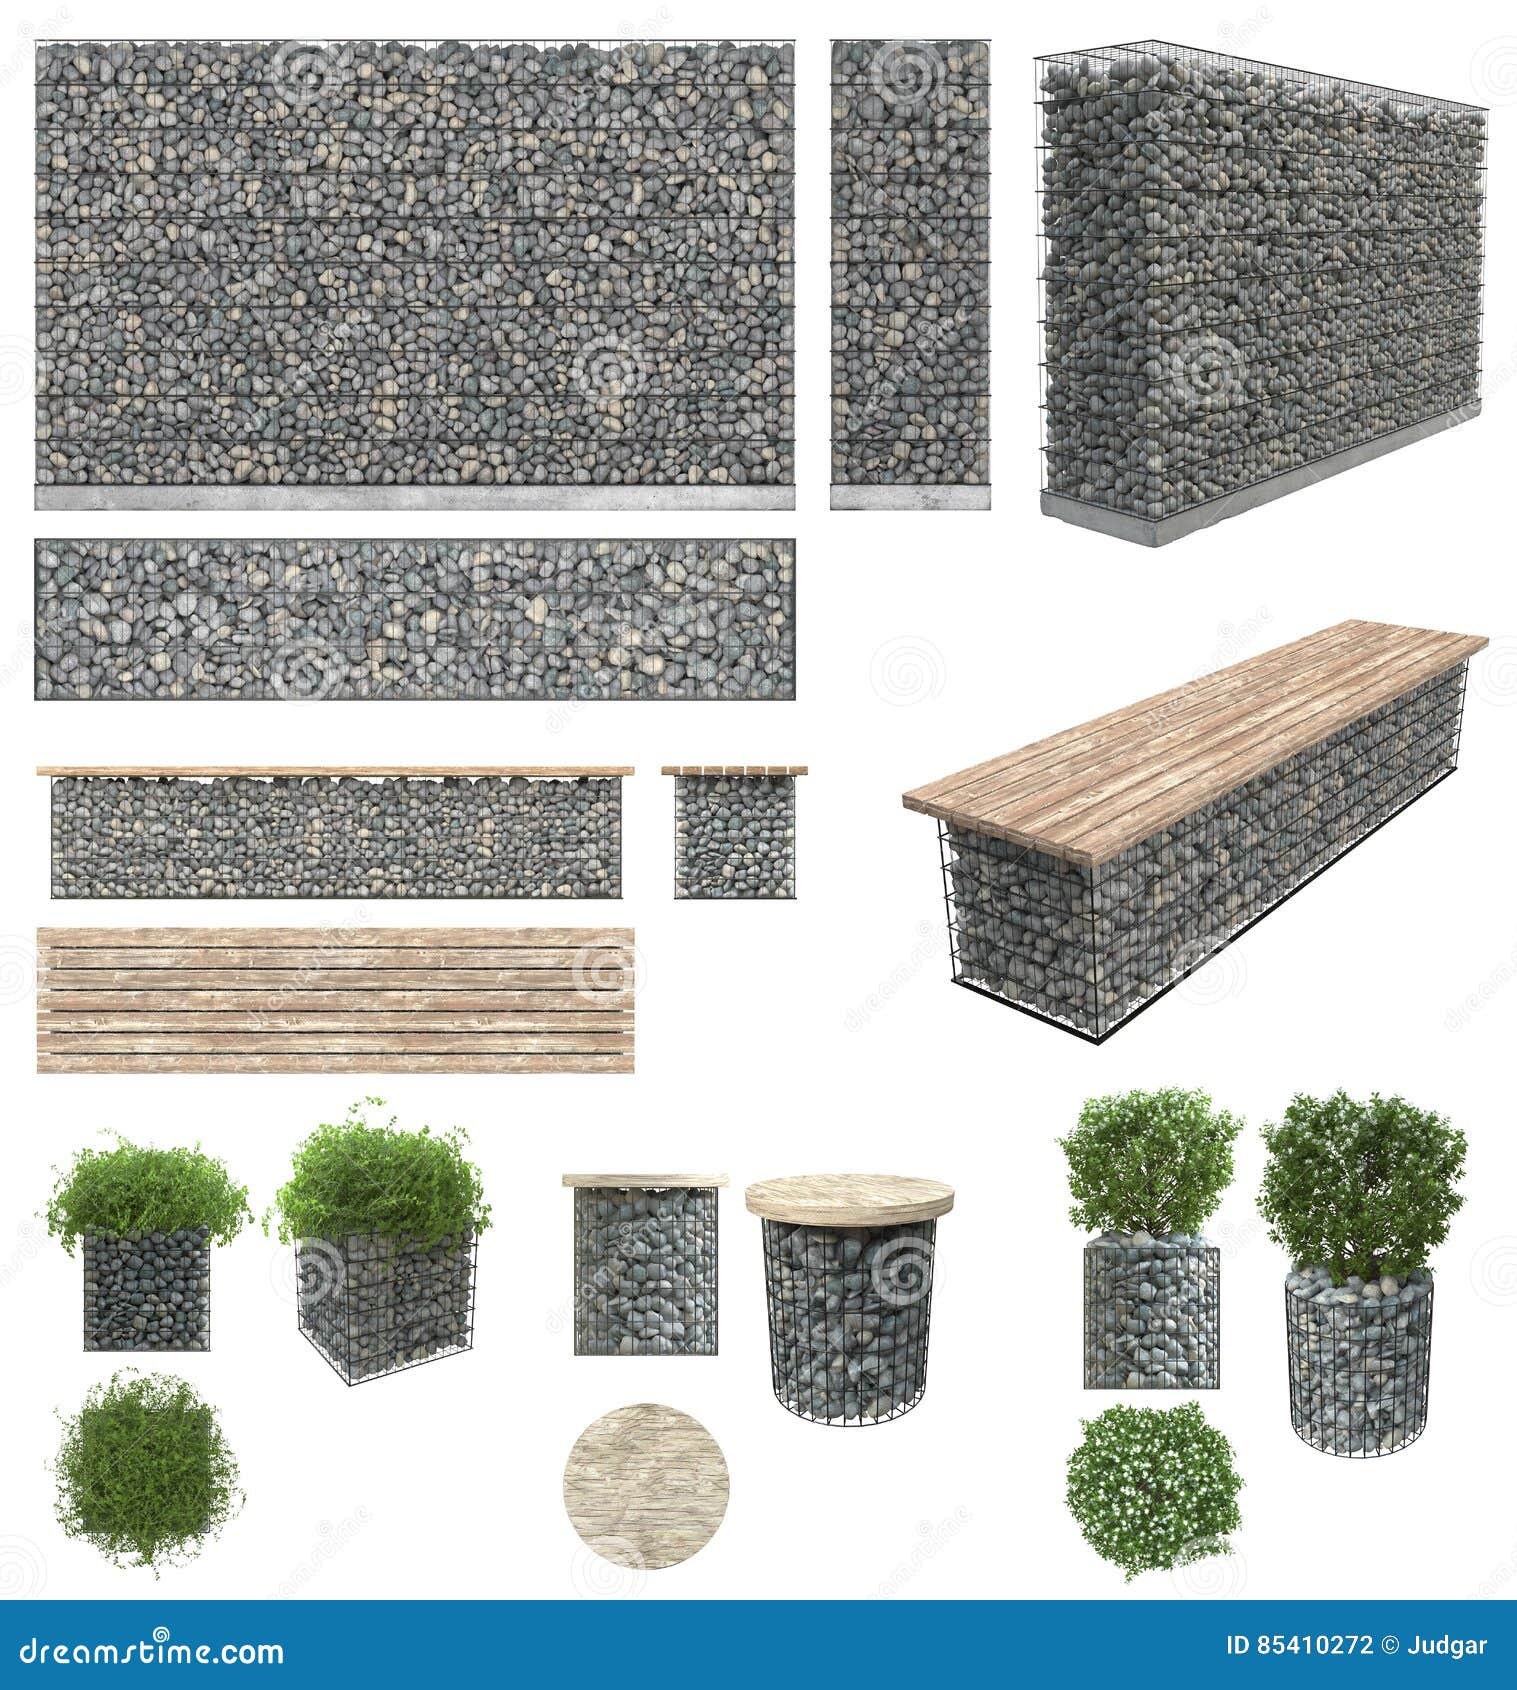 gabion - stones in wire mesh. wall, bench, flower pots with plants of the rocks and metal grates.  on white background. fr